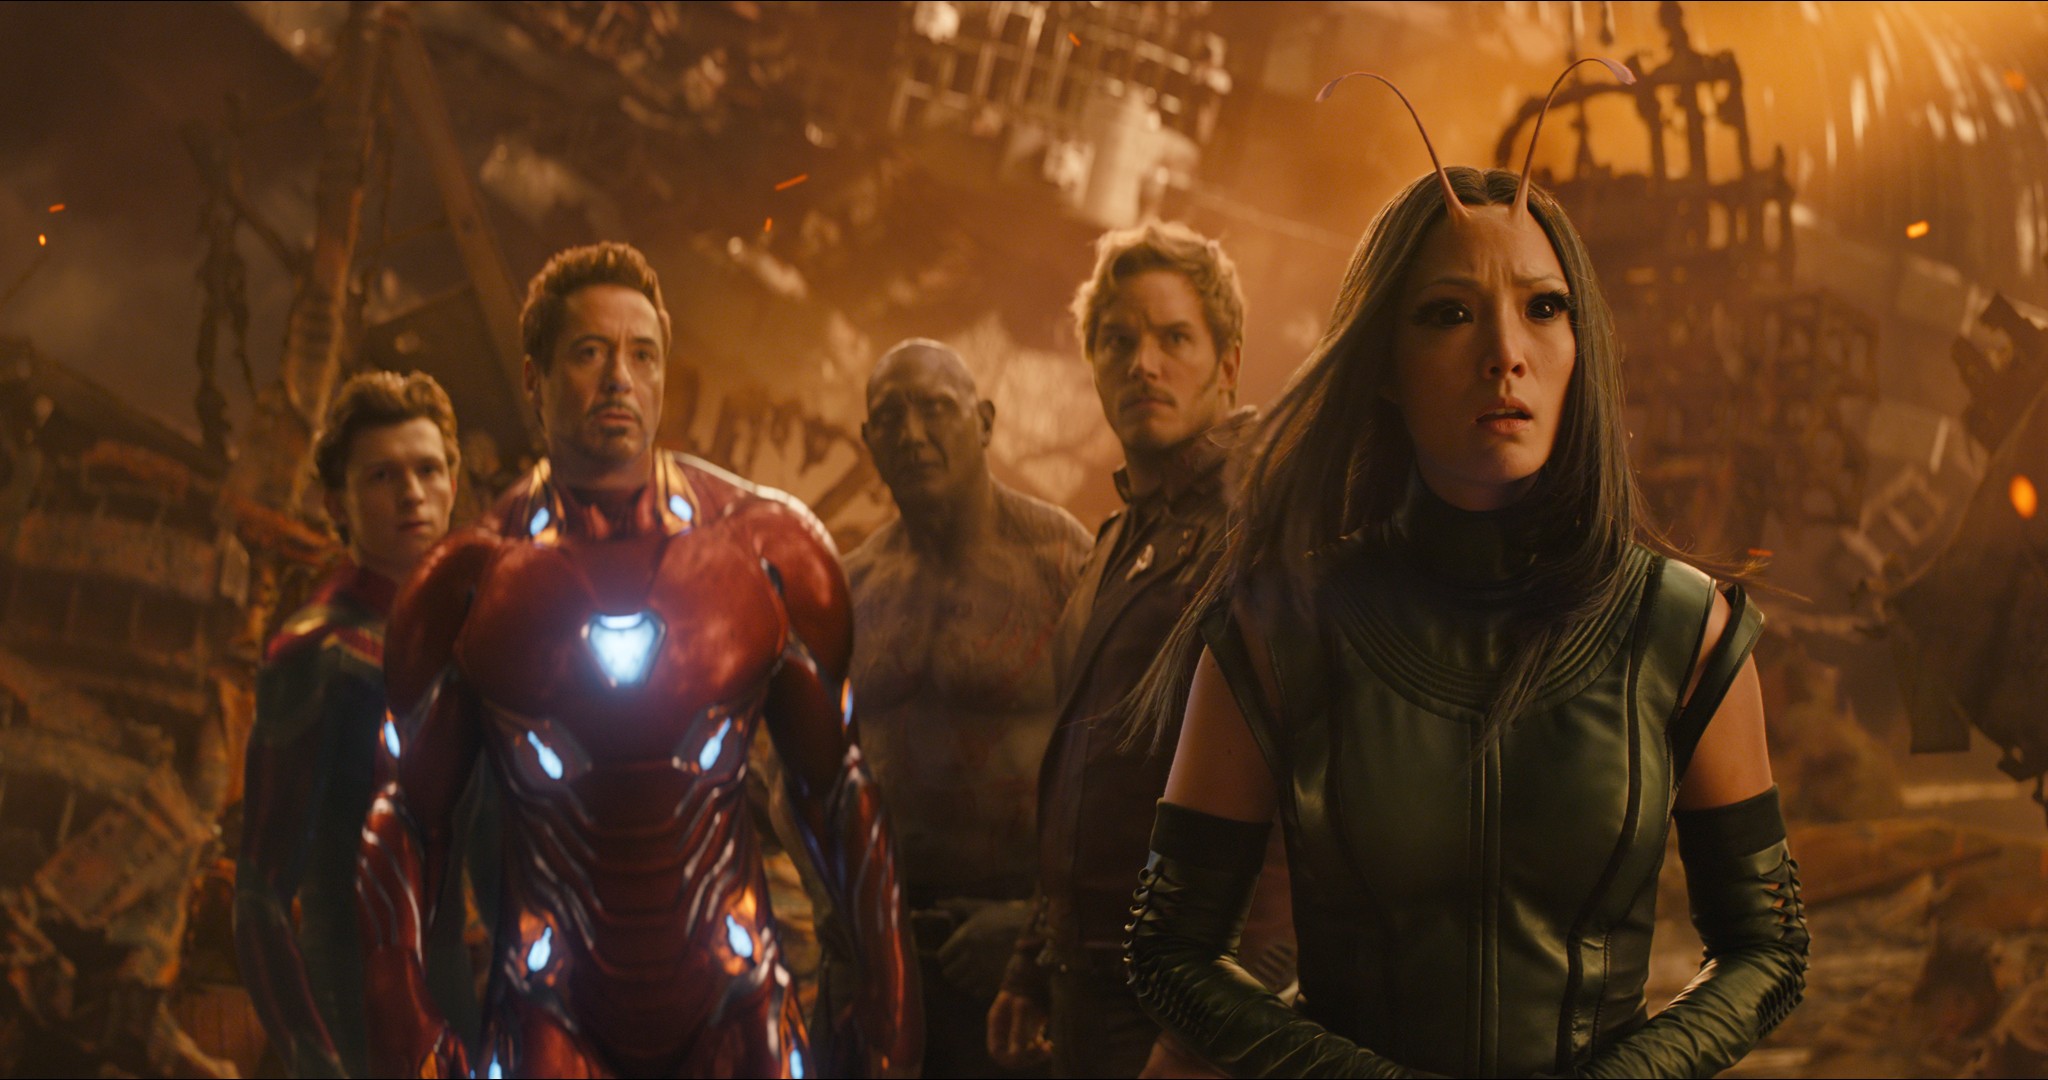 Marvel superheroes in a scene from “Avengers: Infinity War”. Whether we want to encounter such superhuman beings in real life is another matter. Photo: Marvel Studios via AP